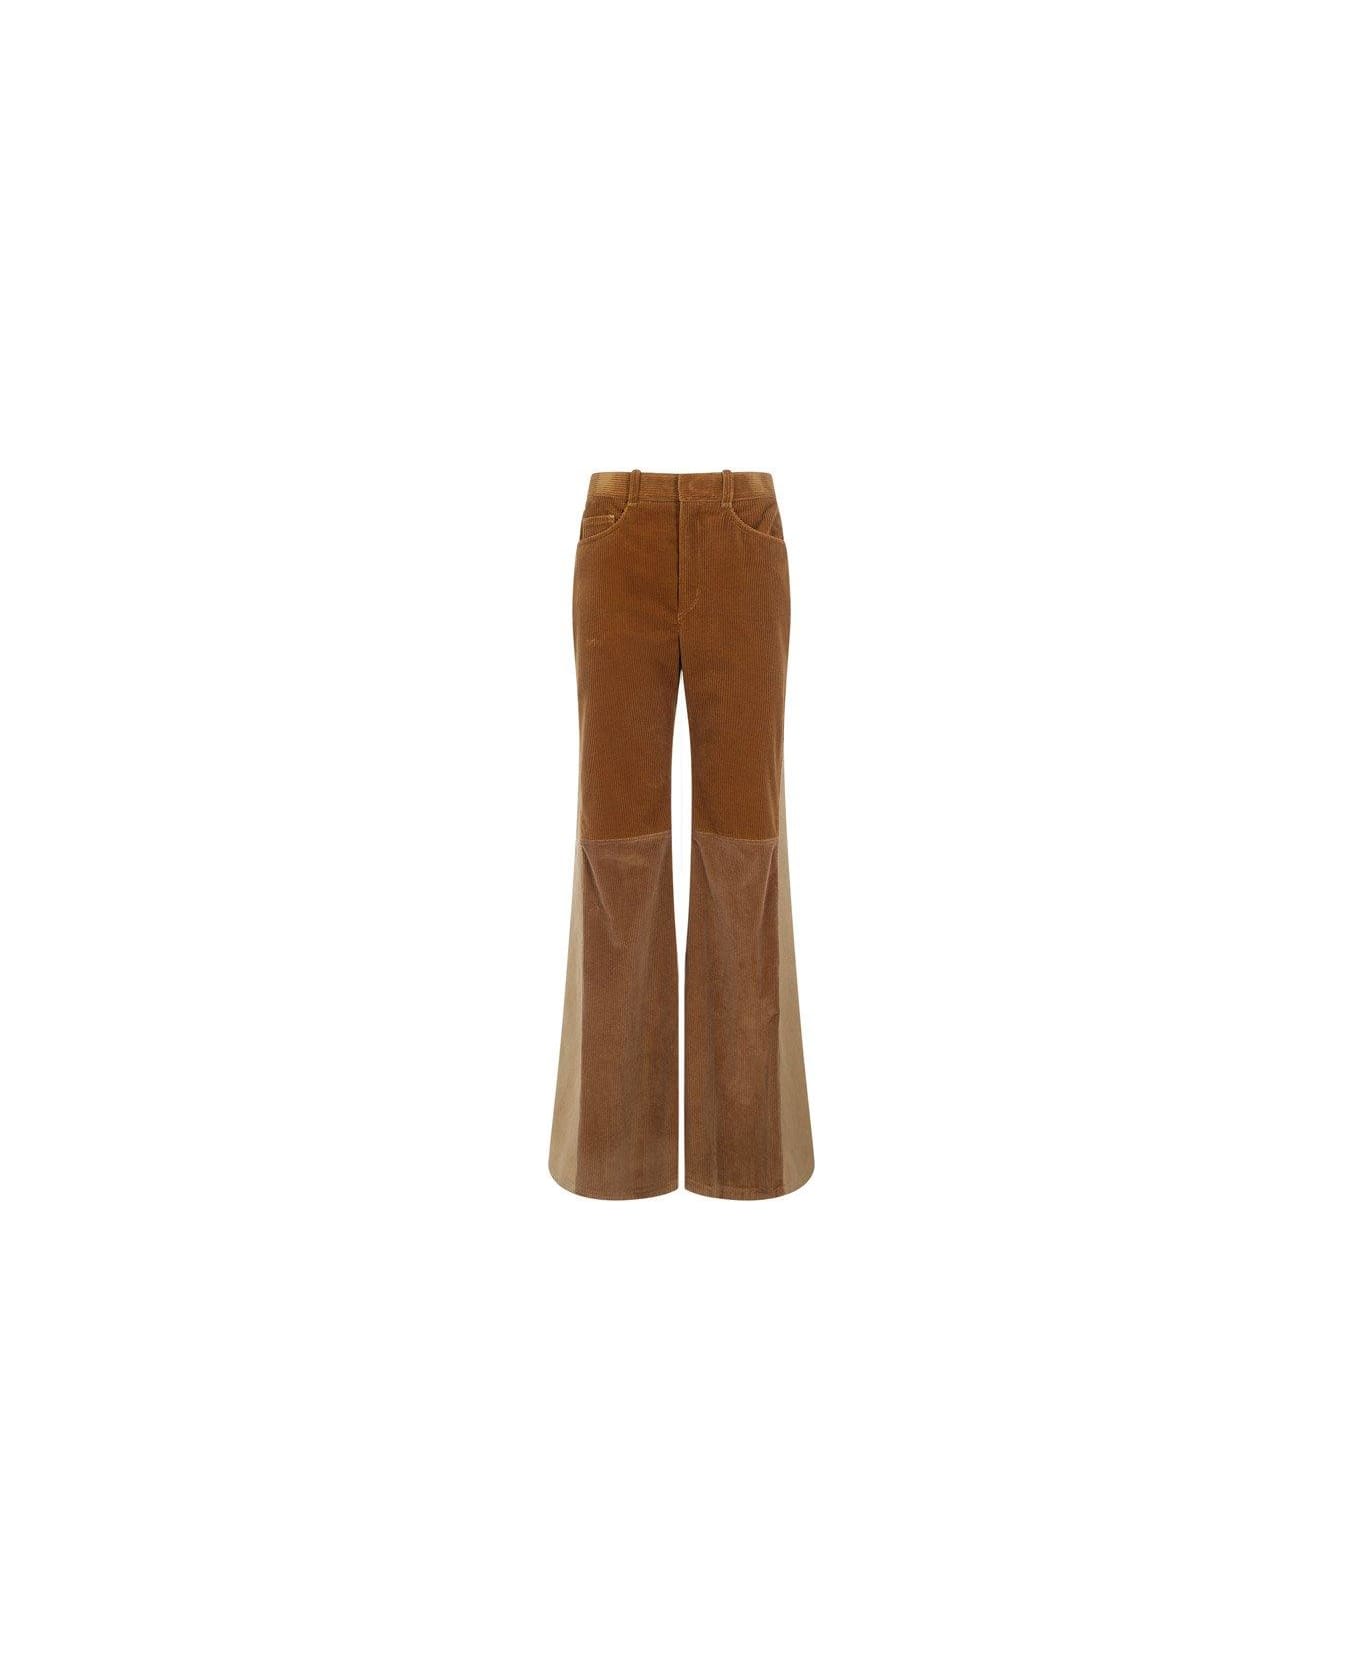 Chloé Patchwork Flared Trousers - Brown